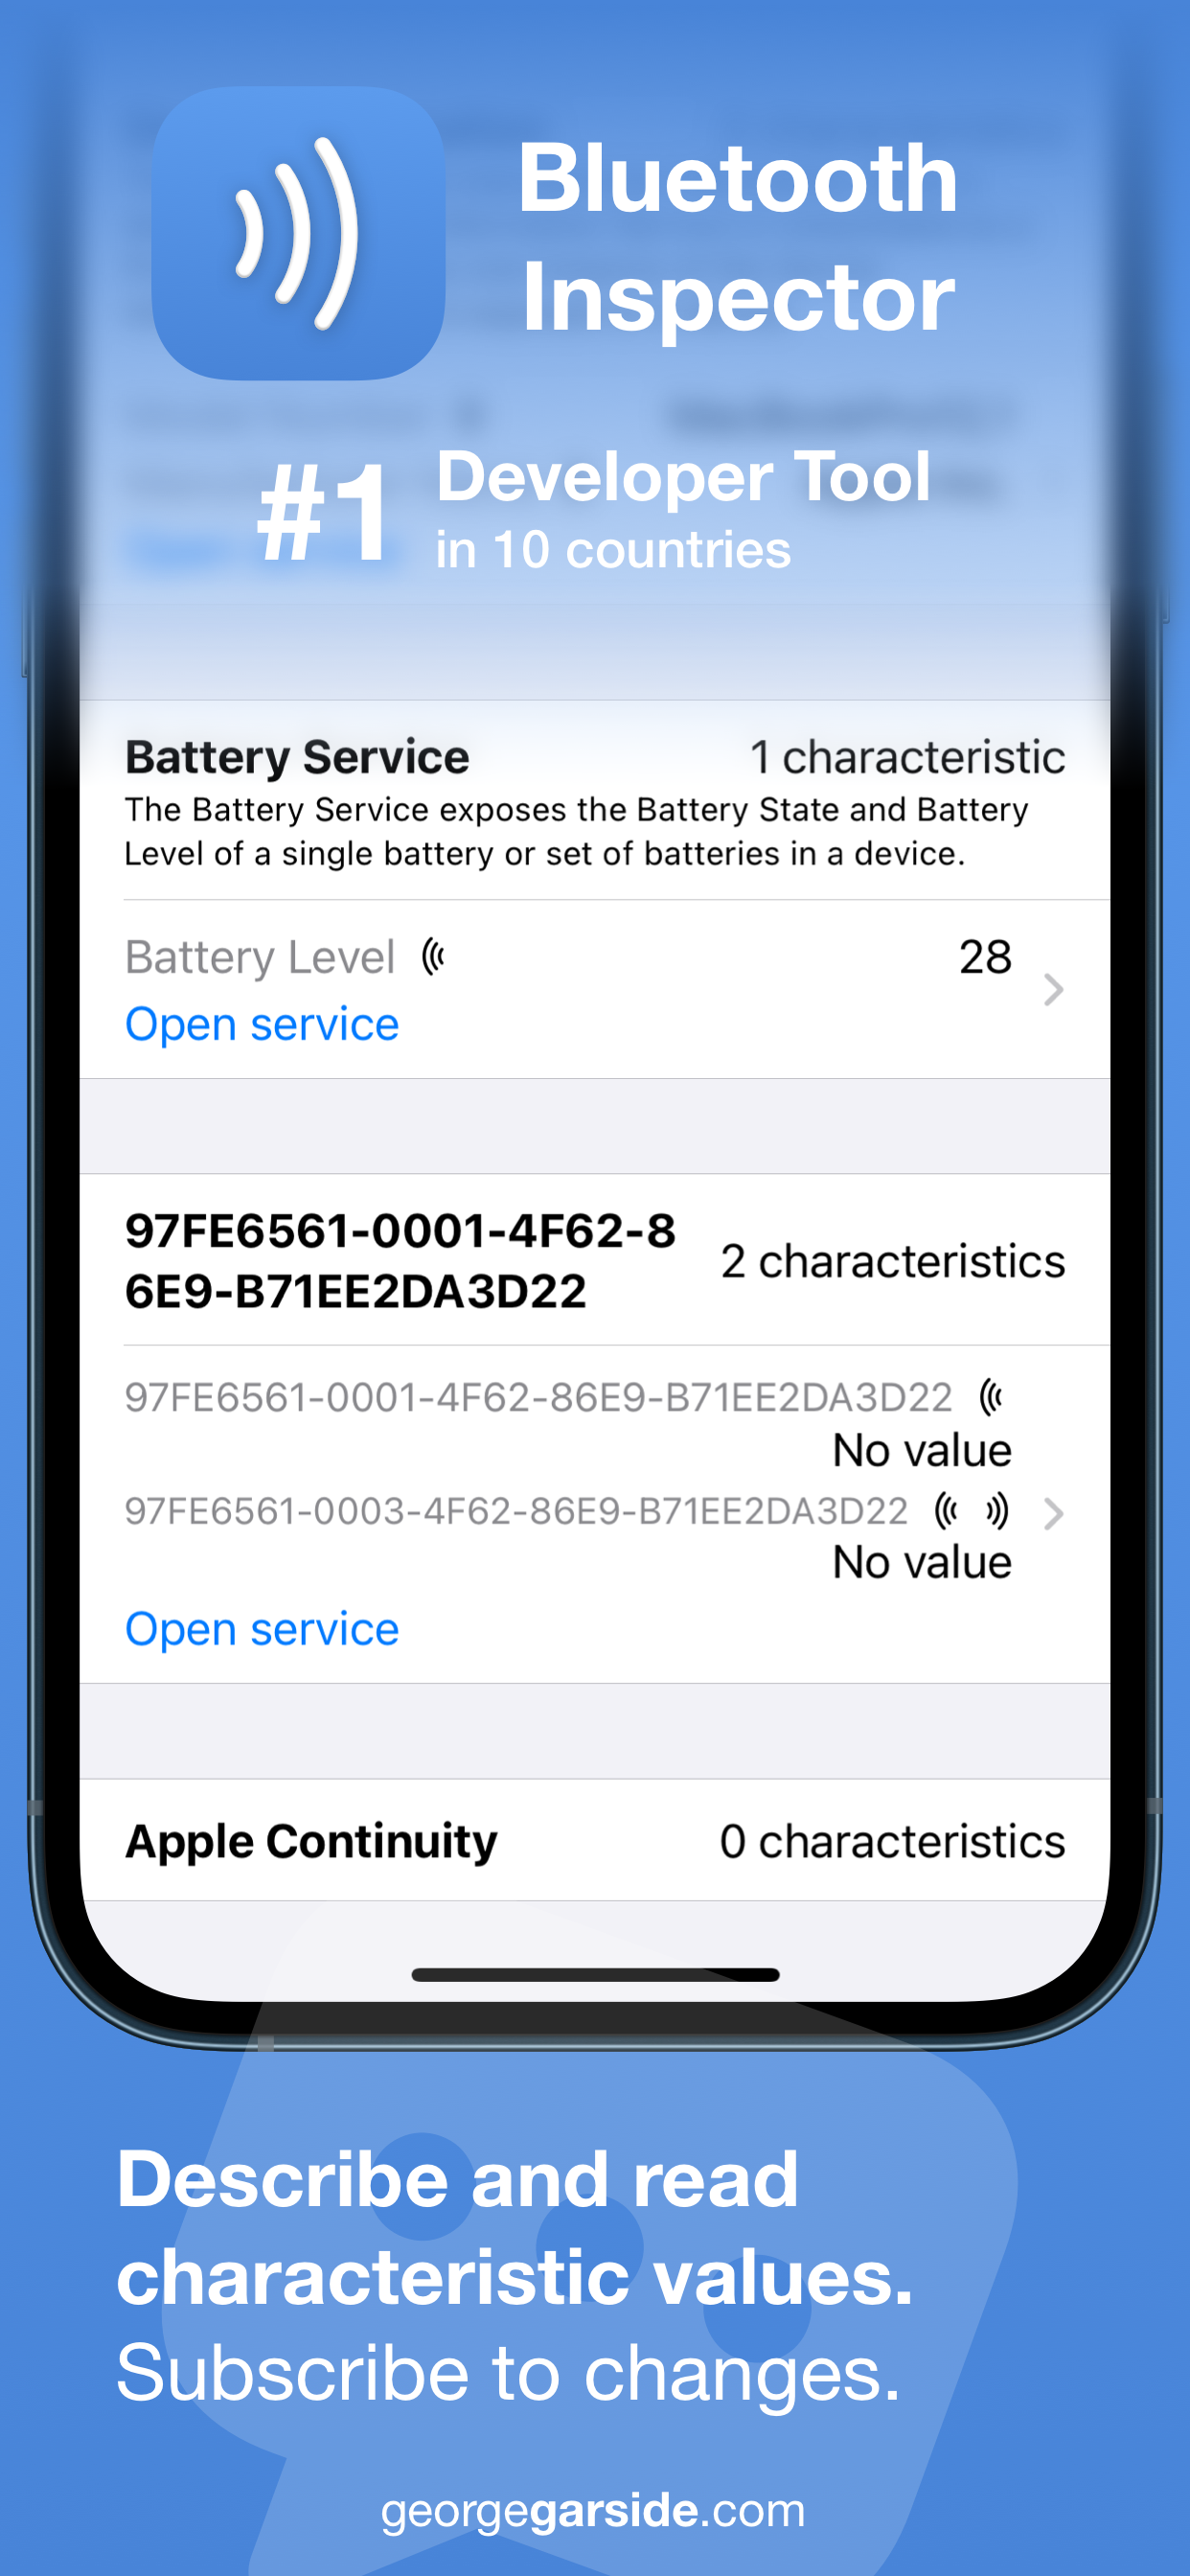 Bluetooth Inspector describe and read characteristic values, subscribe to changes